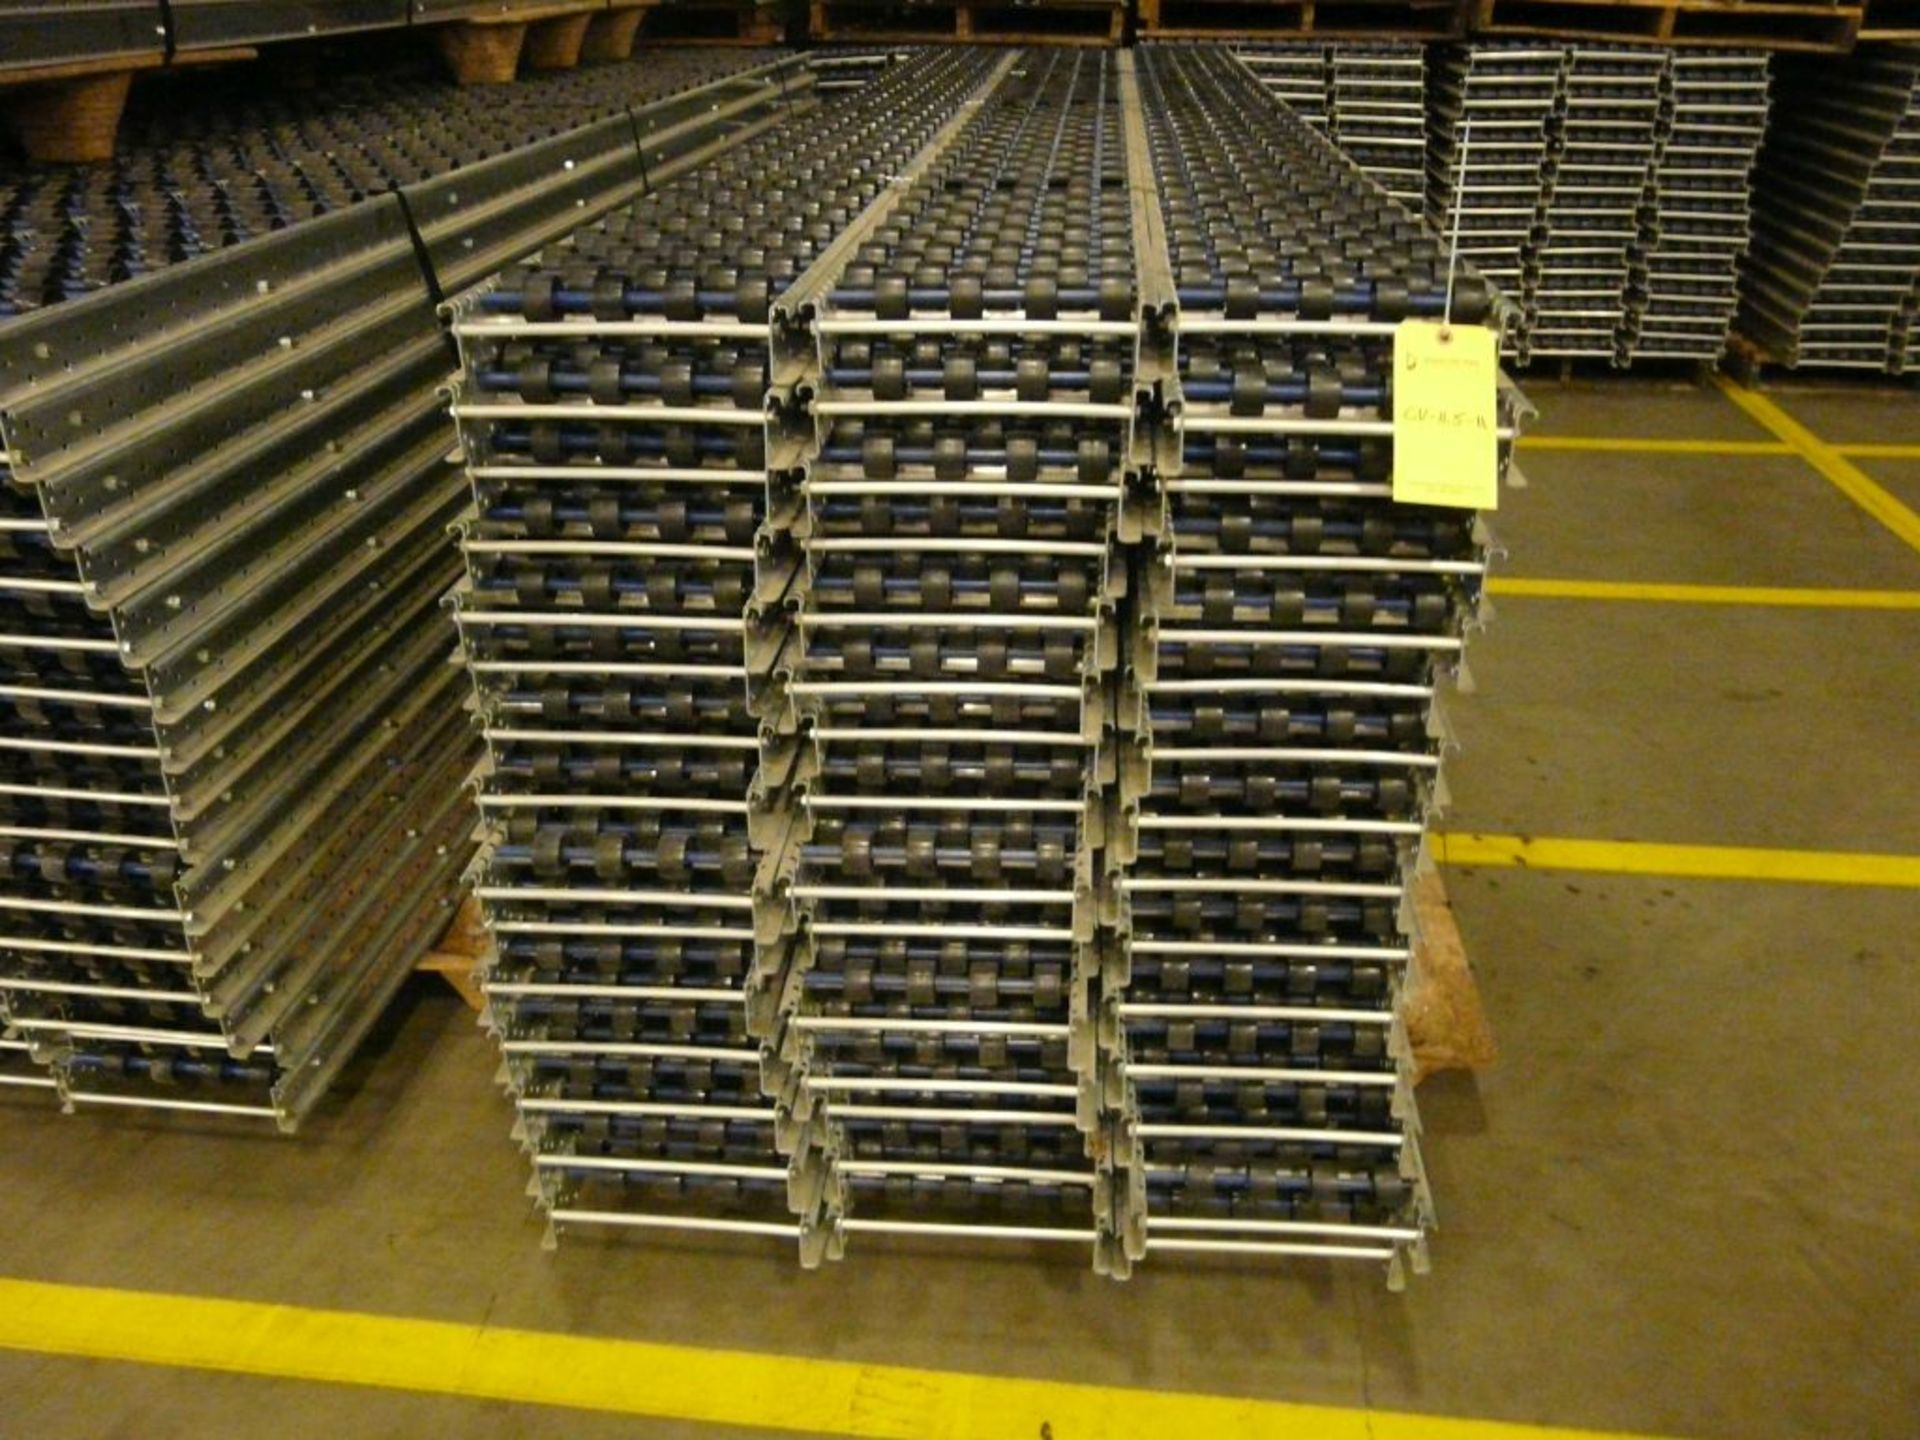 Lot of (90) SpanTrack Wheelbed Carton Flow Conveyors - 11.5'L x 11"W; Tag: 223560 - $30 Lot - Image 2 of 4